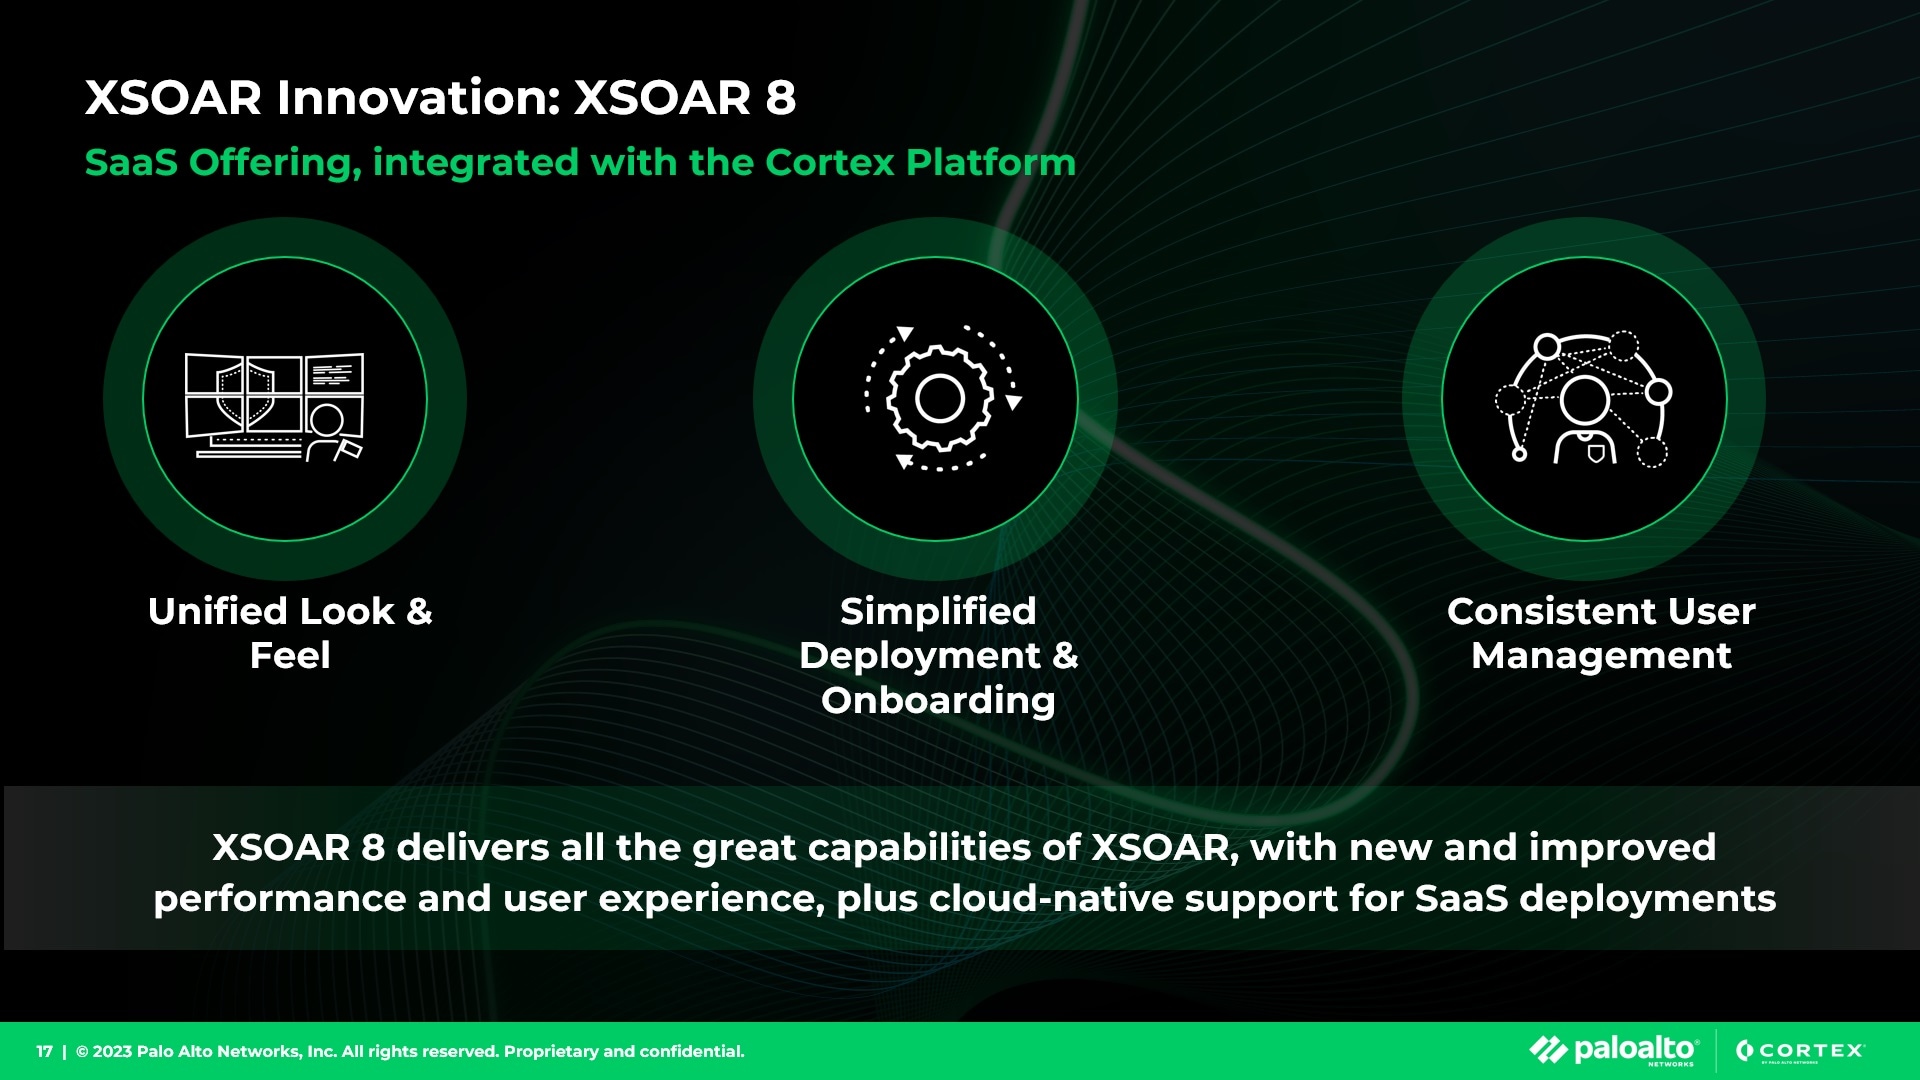 XSOAR Innovation: XSOAR 8 - SaaS offering, integrated with the Cortex Platform.